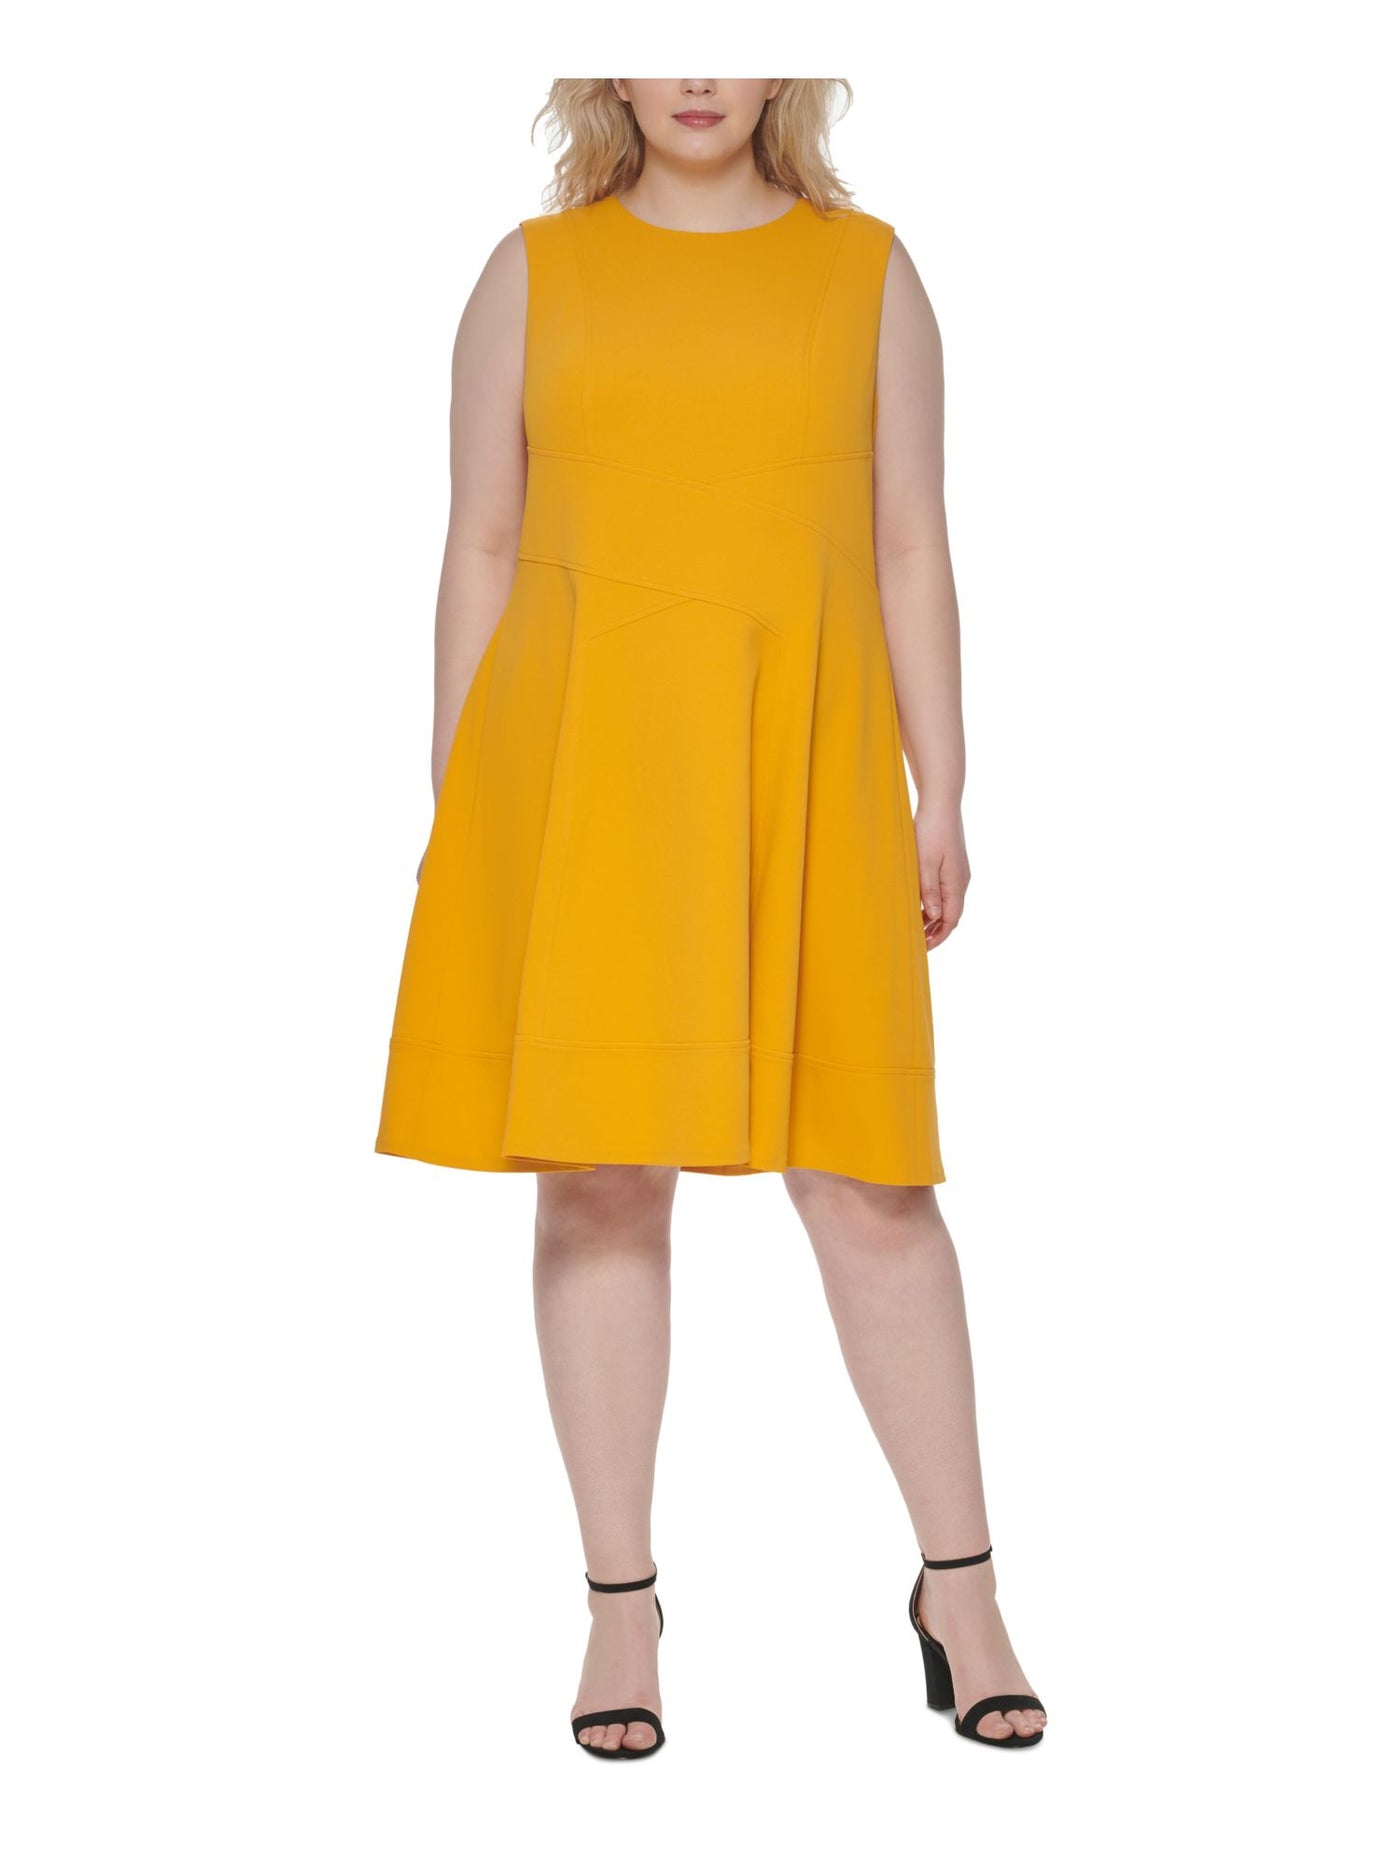 TOMMY HILFIGER Womens Yellow Zippered Unlined Seam Details Sleeveless Crew Neck Below The Knee Fit + Flare Dress Plus 16W